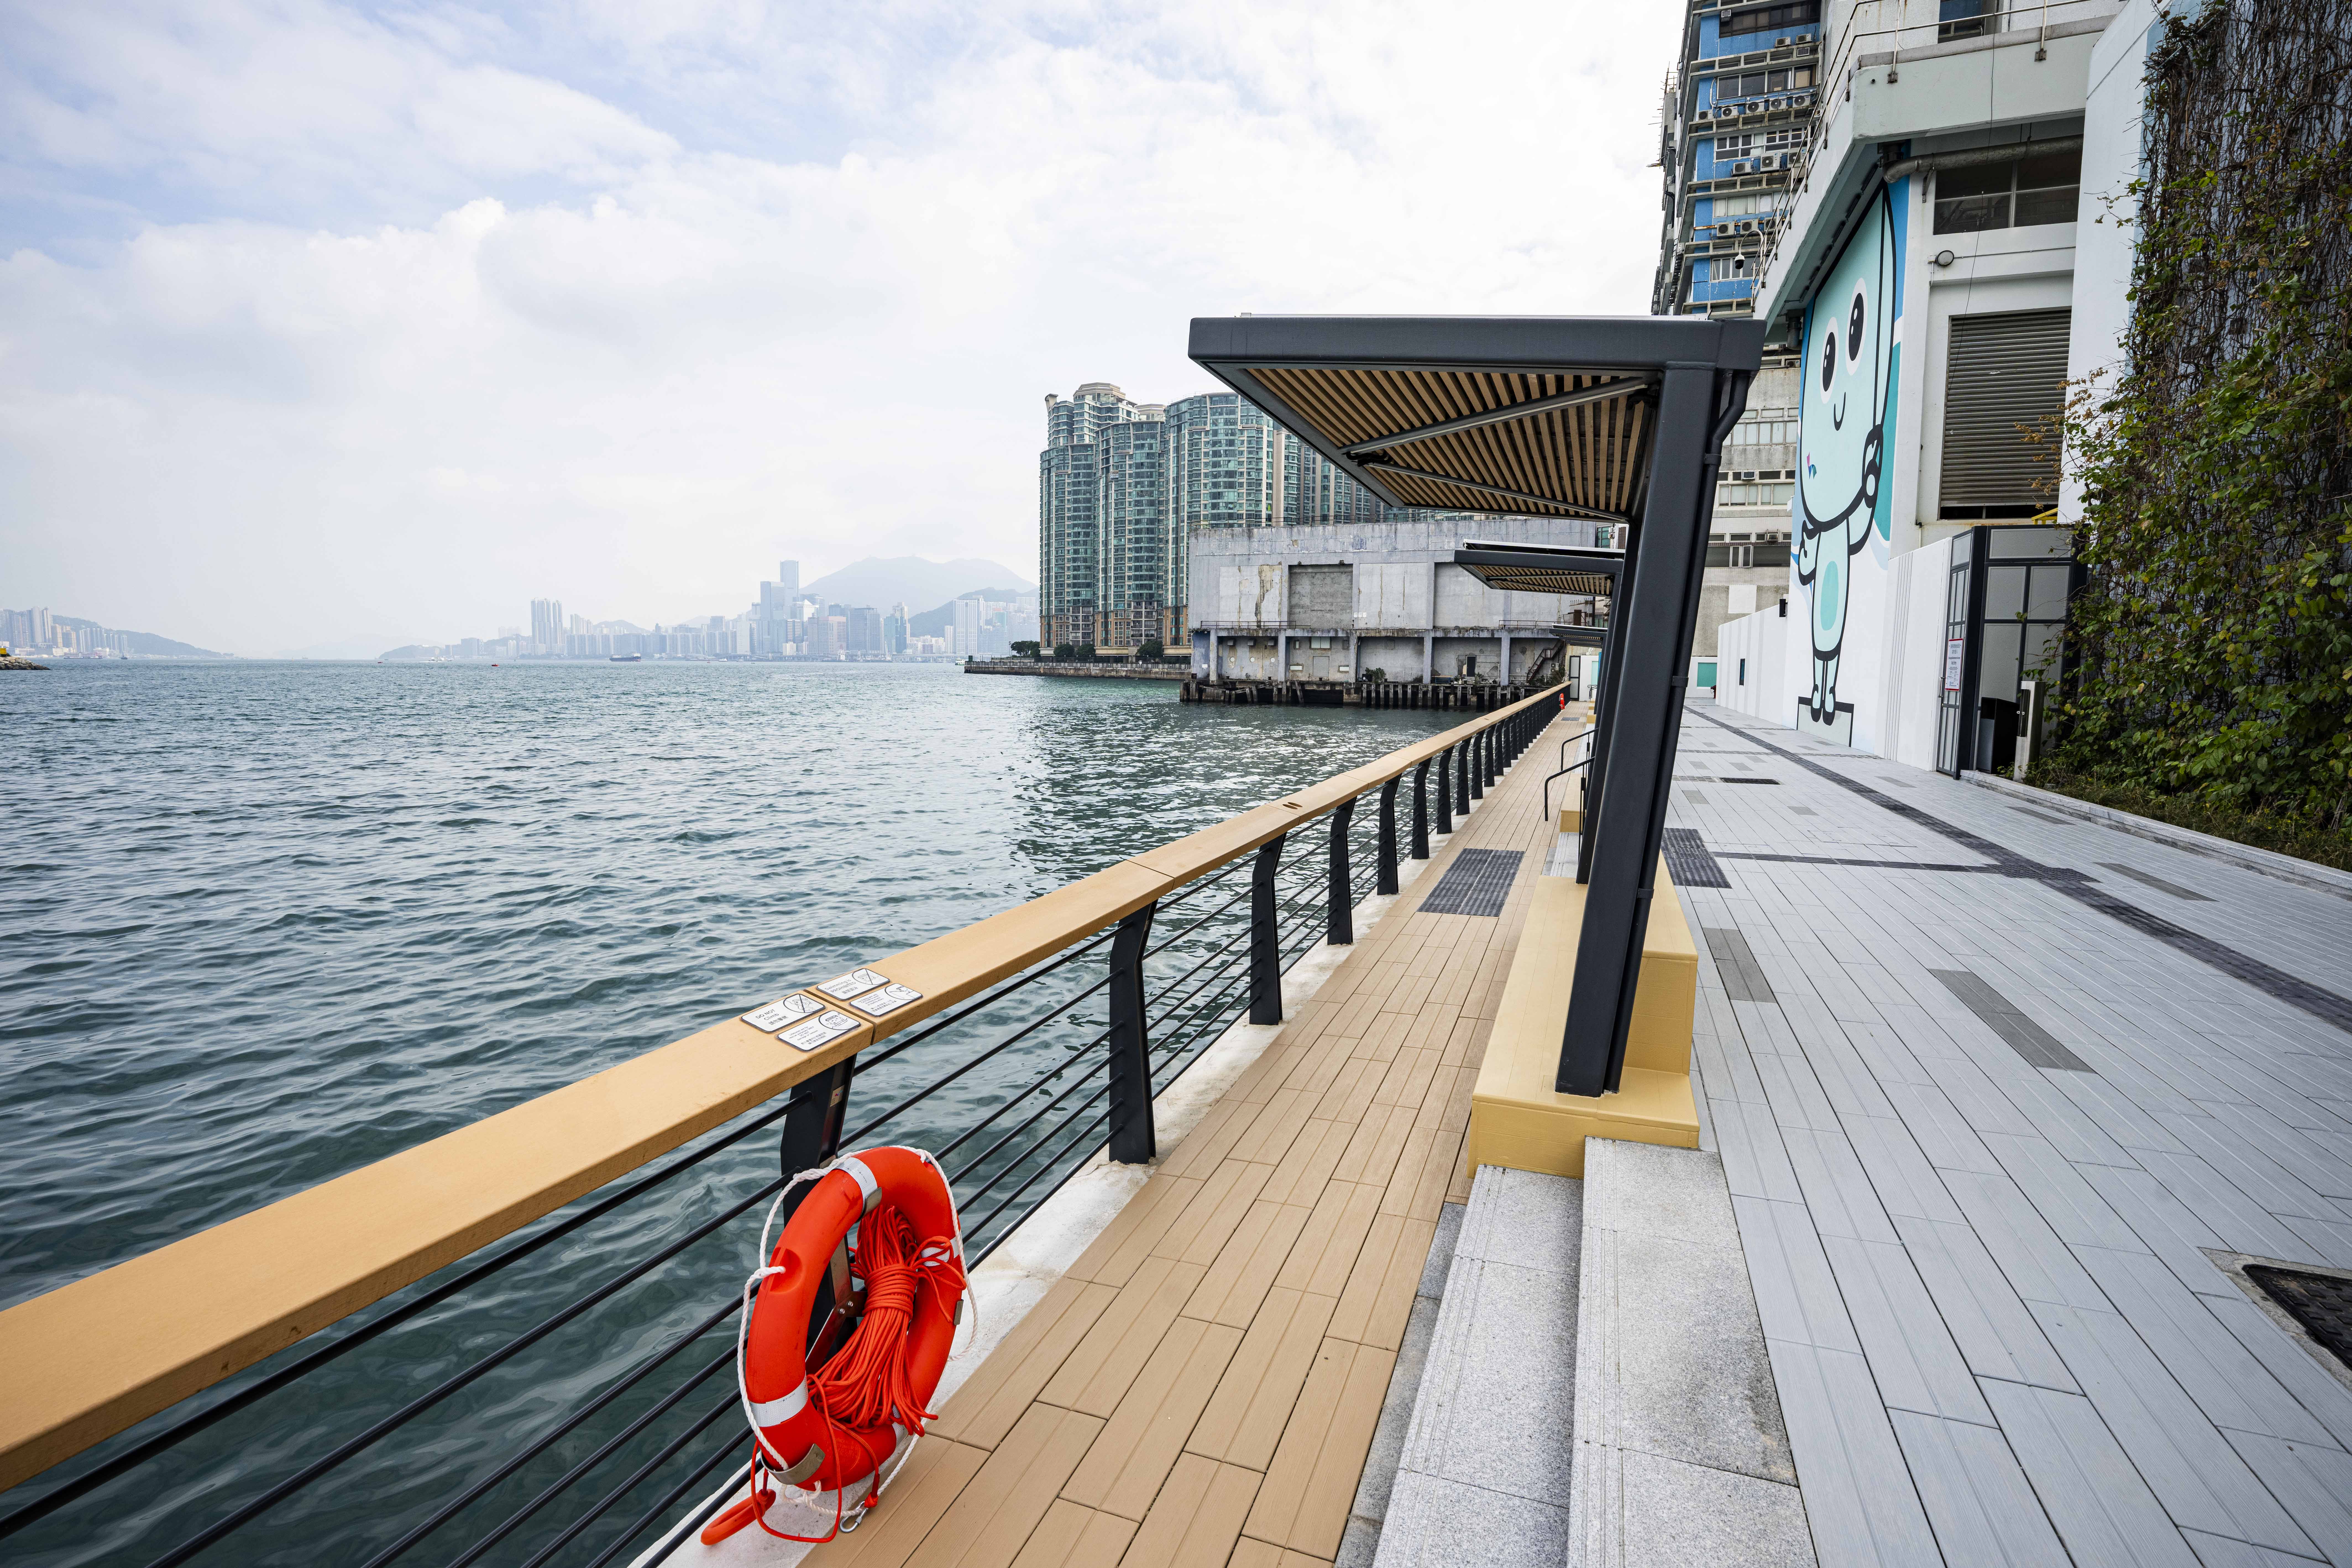 The To Kwa Wan Promenade is open for public use from today (December 21). Photo shows the benches at the To Kwa Wan Promenade.